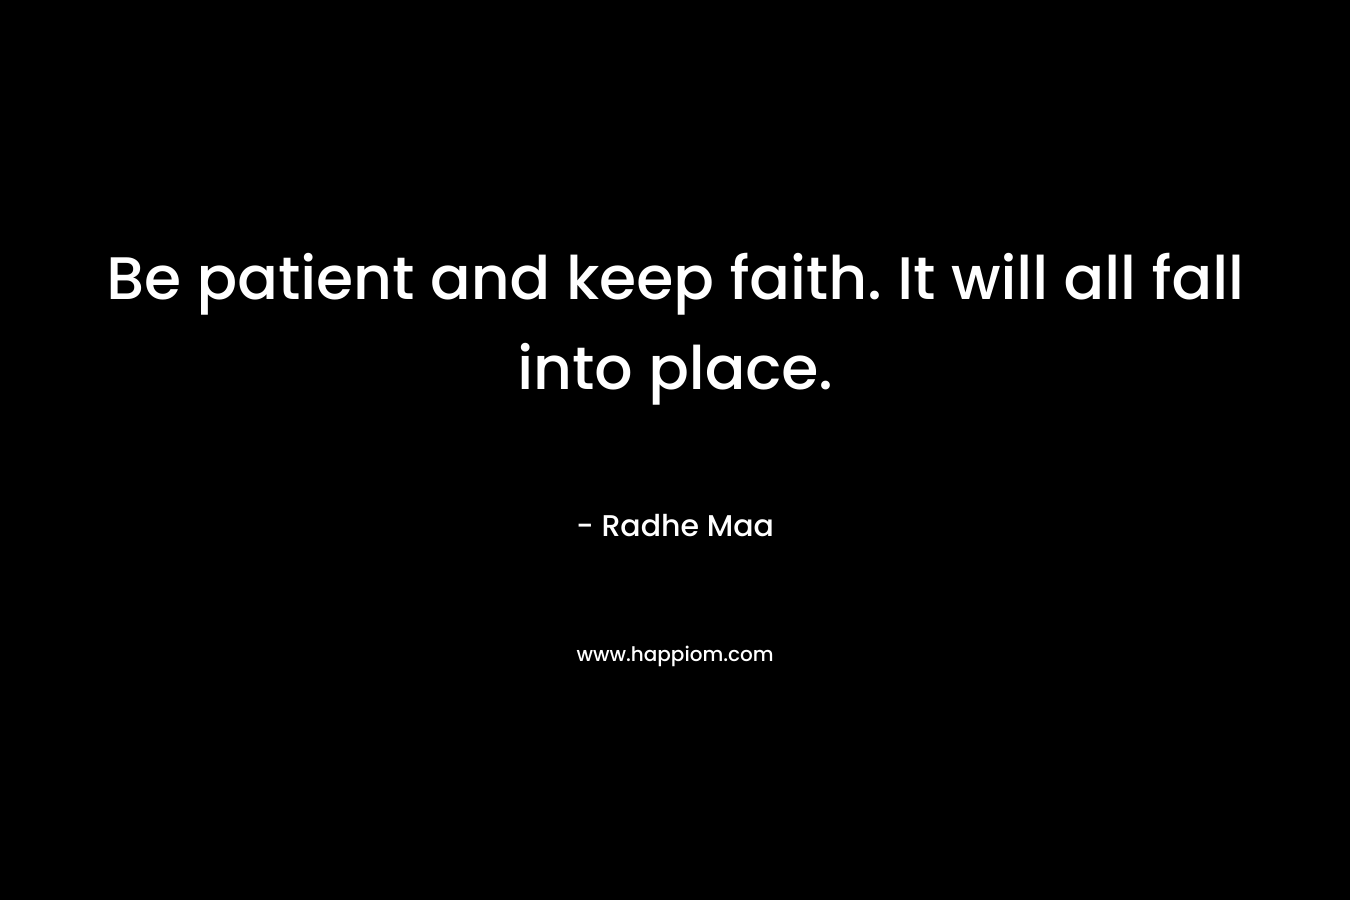 Be patient and keep faith. It will all fall into place.